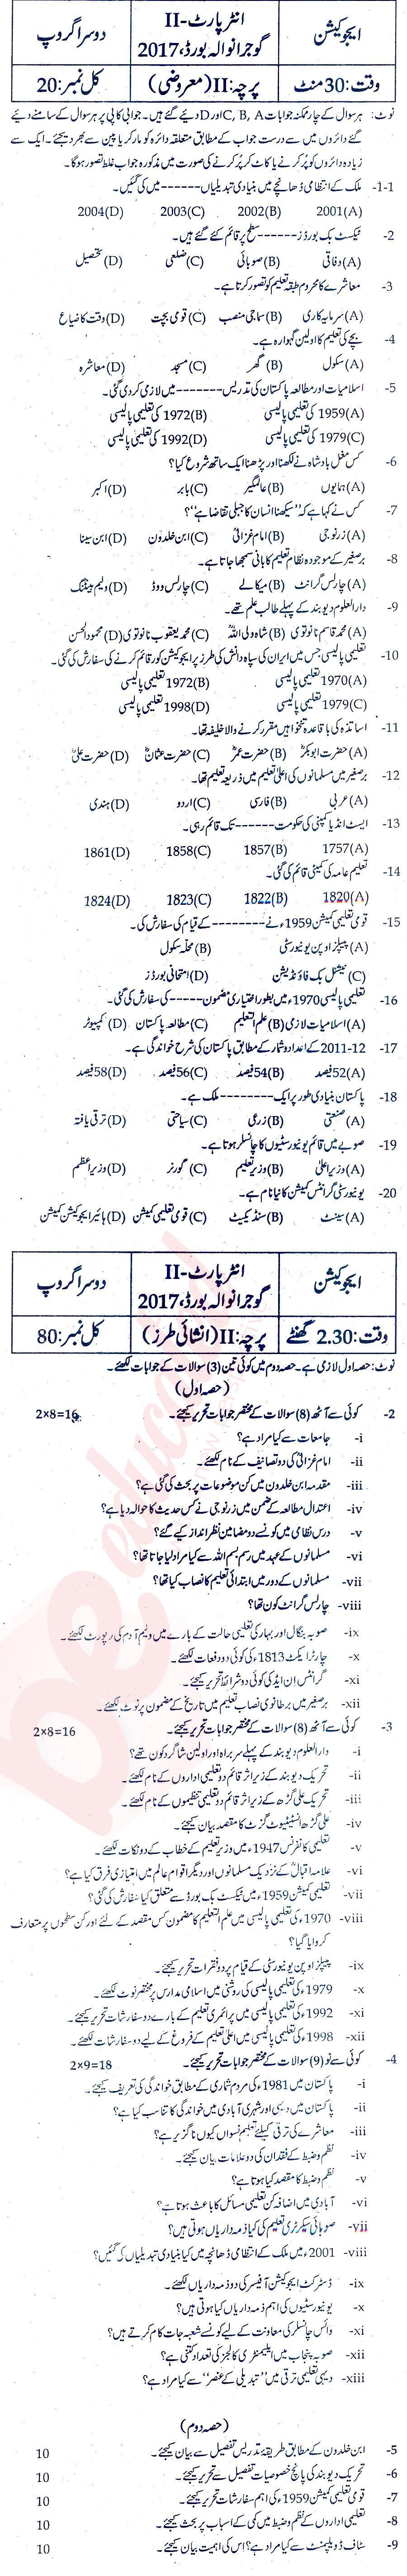 Education FA Part 2 Past Paper Group 2 BISE Gujranwala 2017